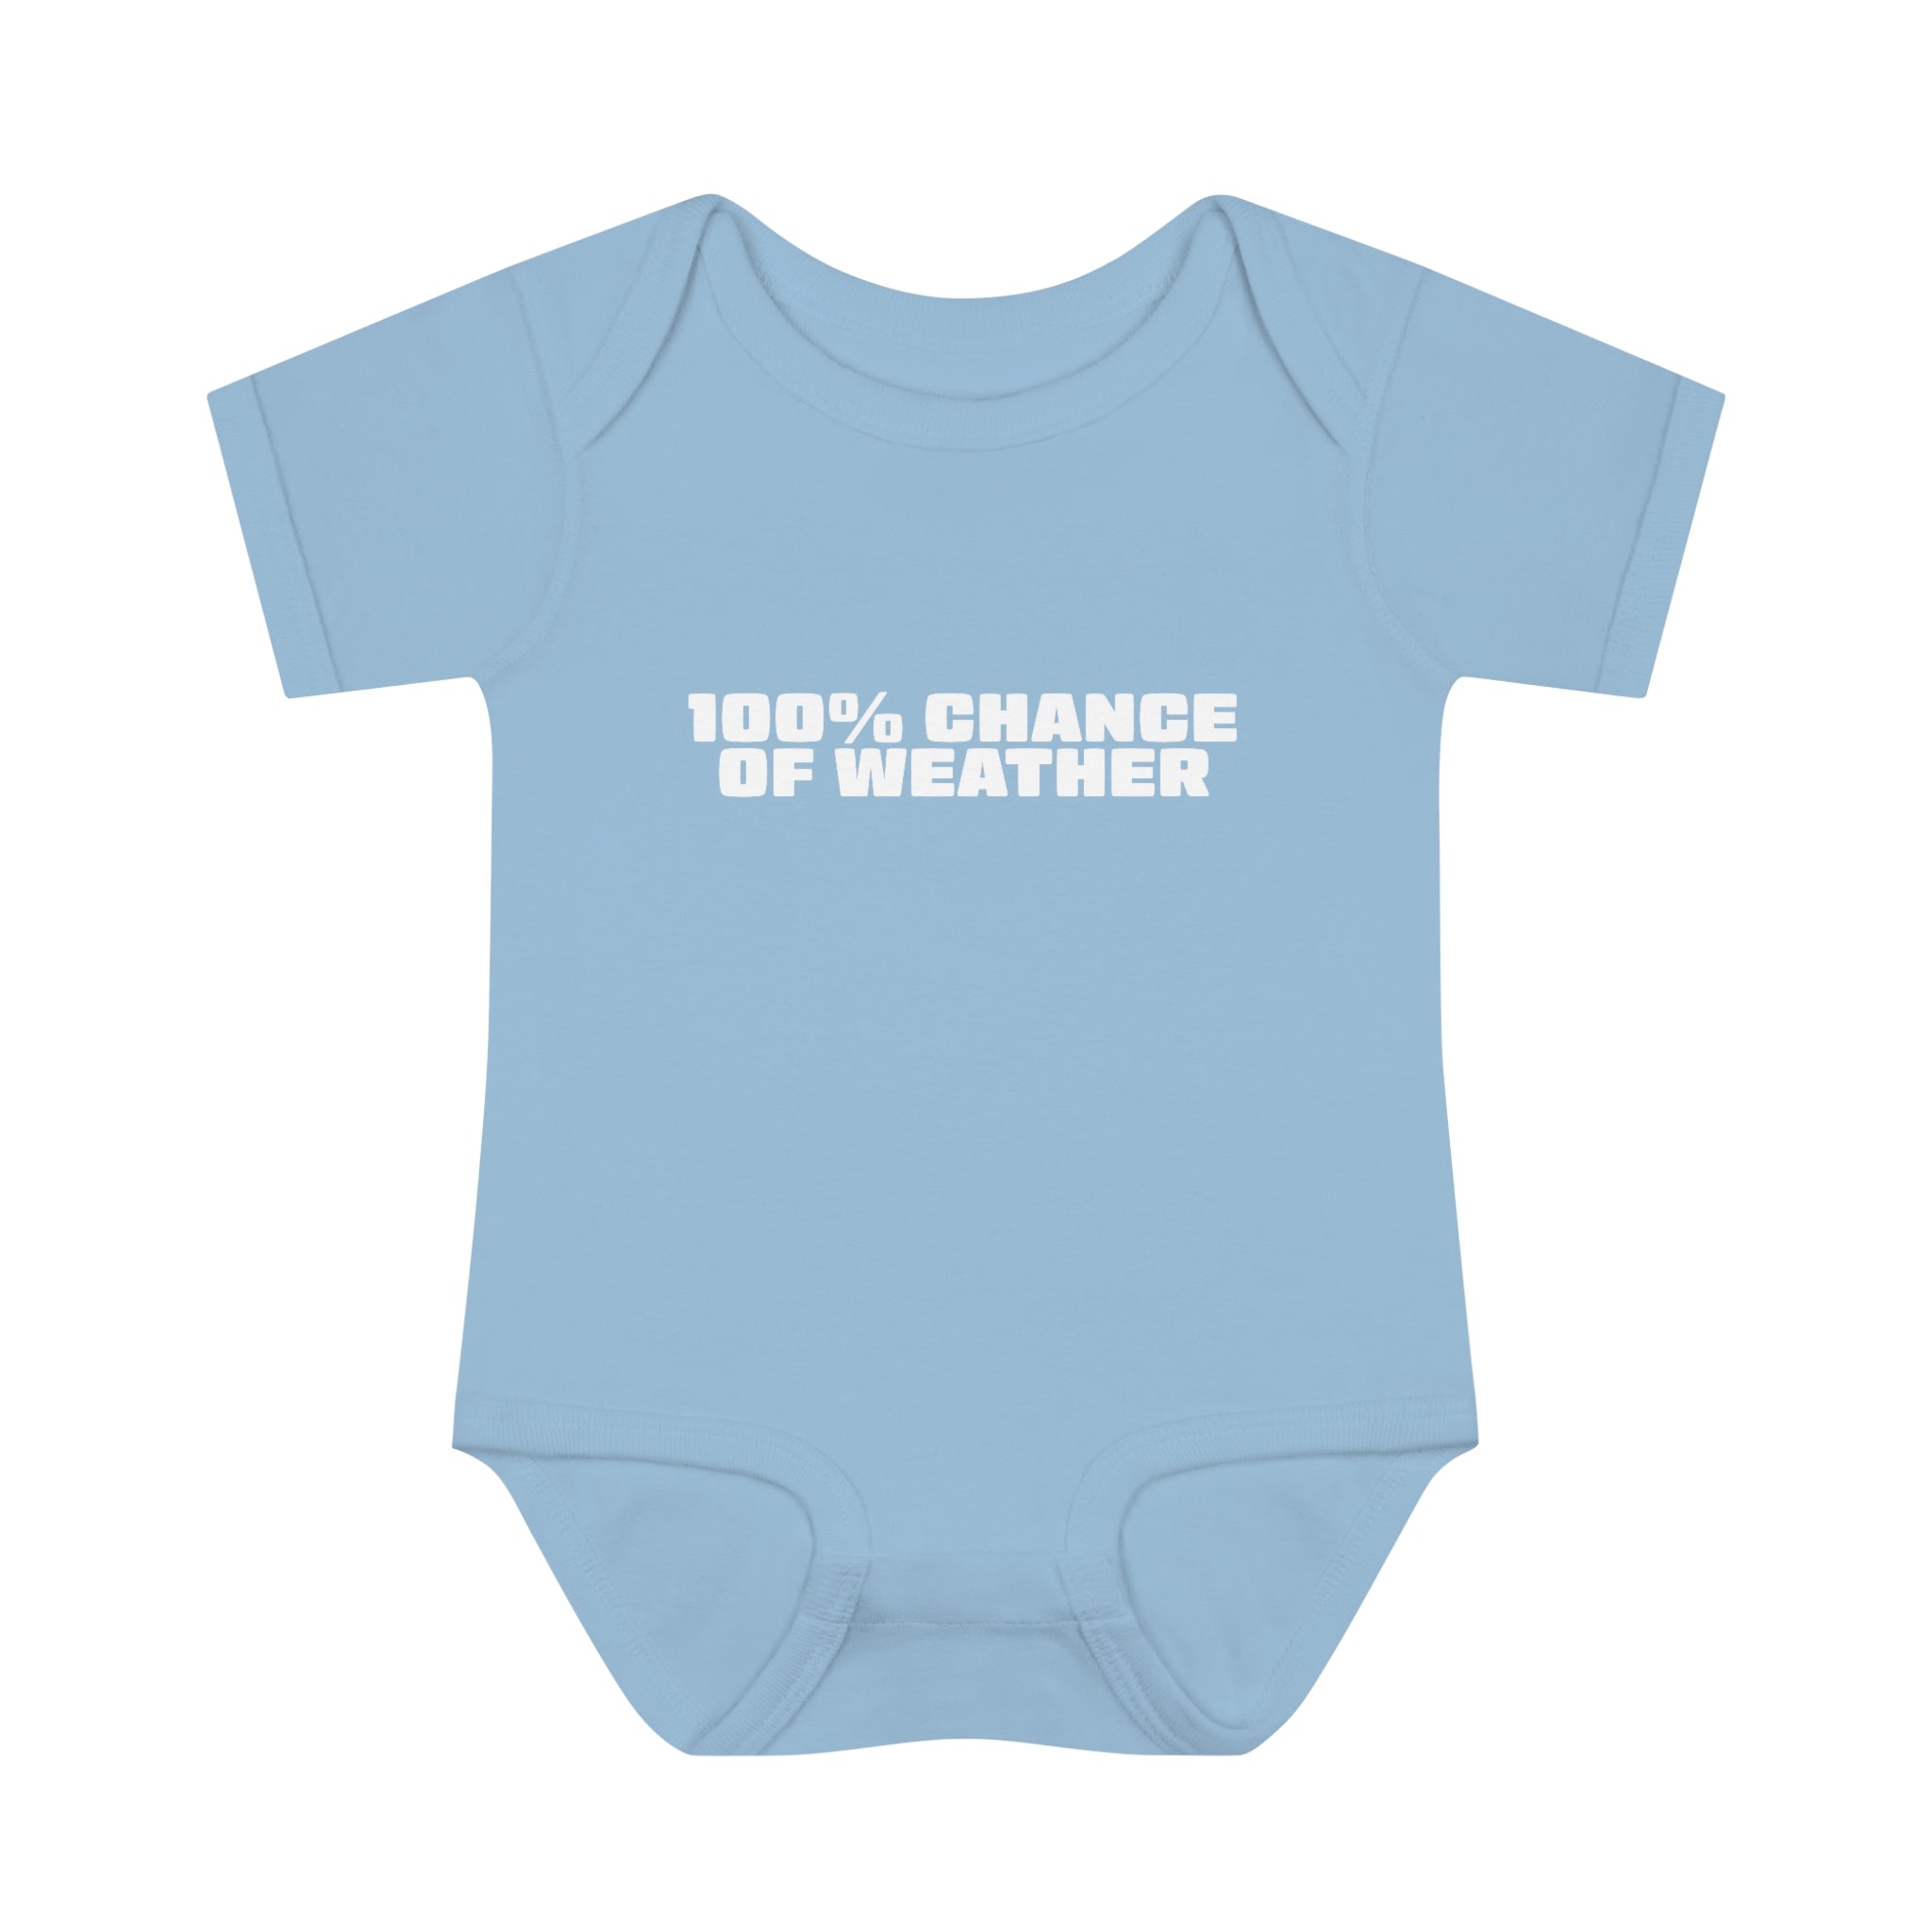 100% Chance of Weather Infant Bodysuit 